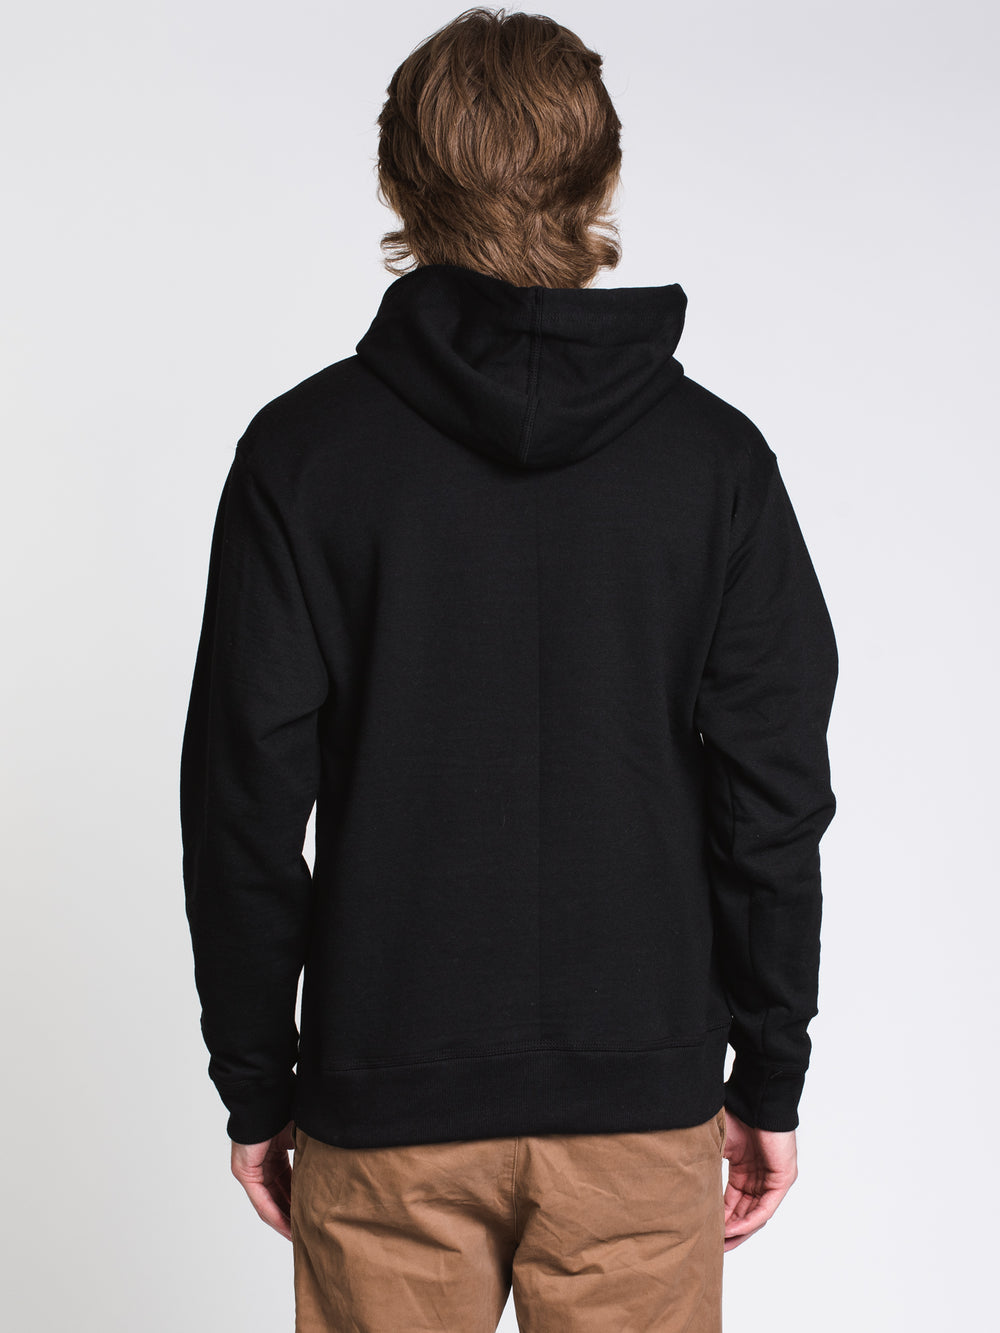 MENS COLOUR POP PULLOVER HOODIE - BLACK/RED - CLEARANCE